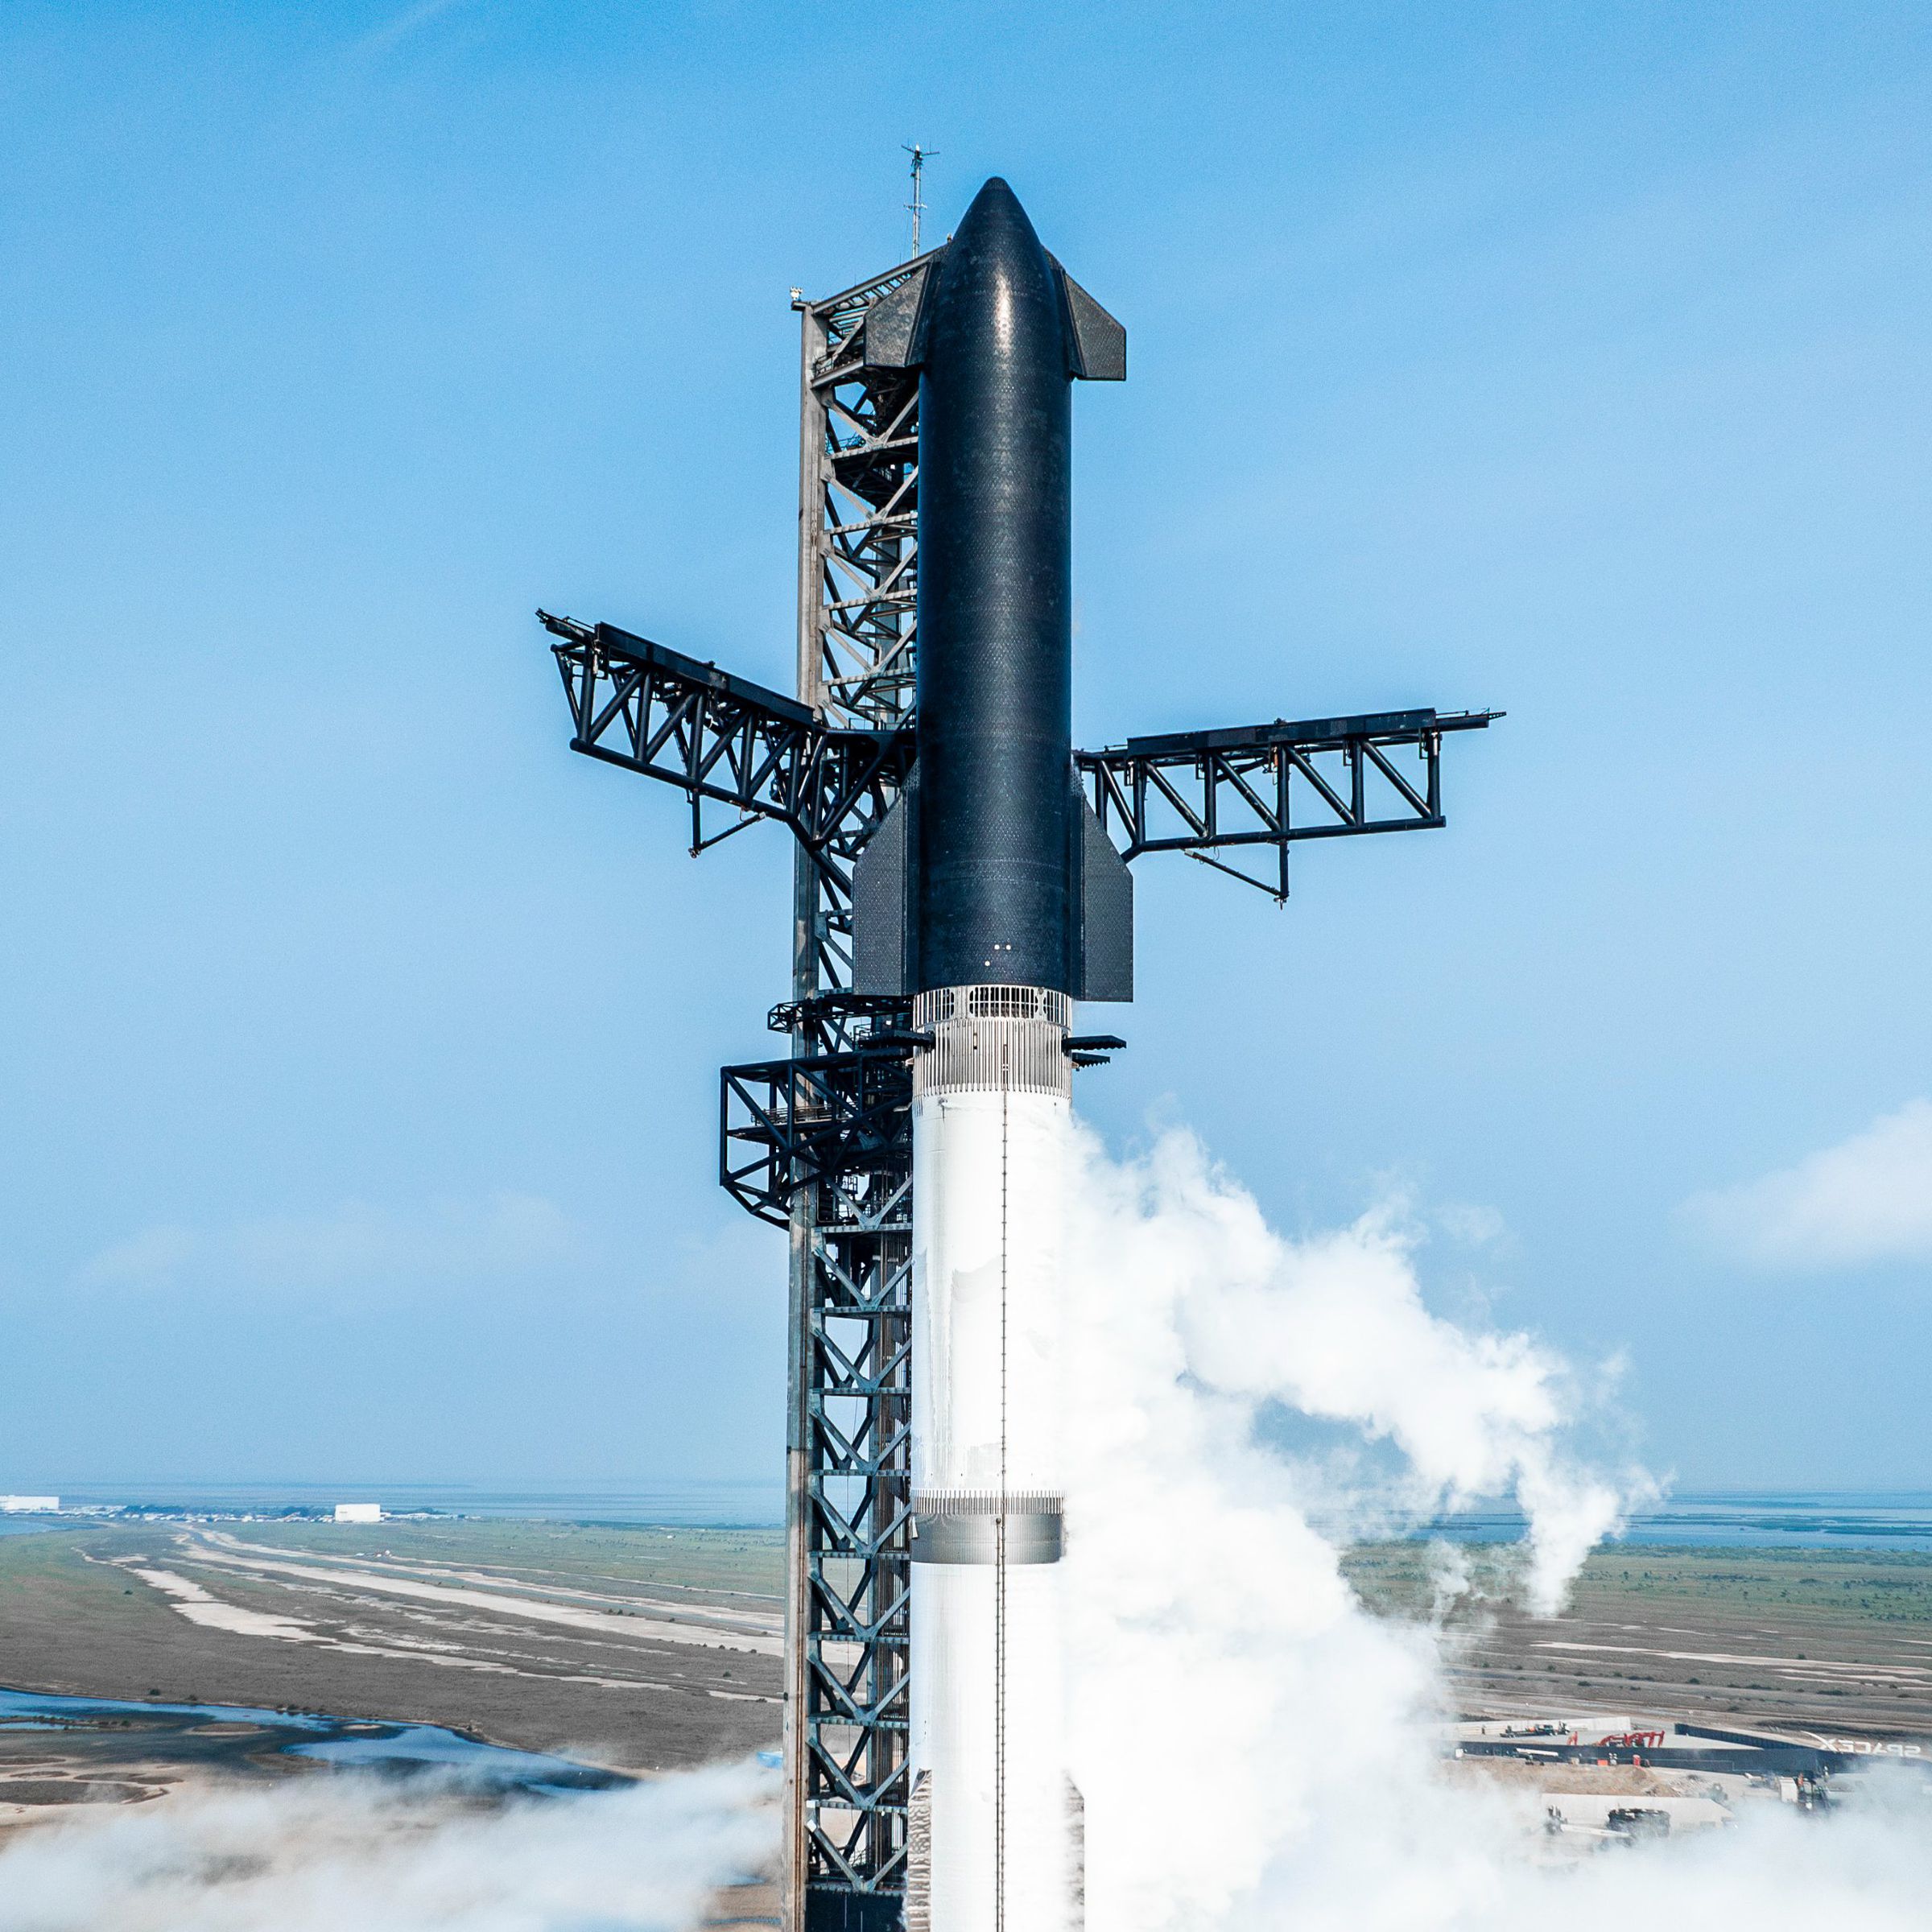 SpaceX’s Starship rocket on its launch pad.